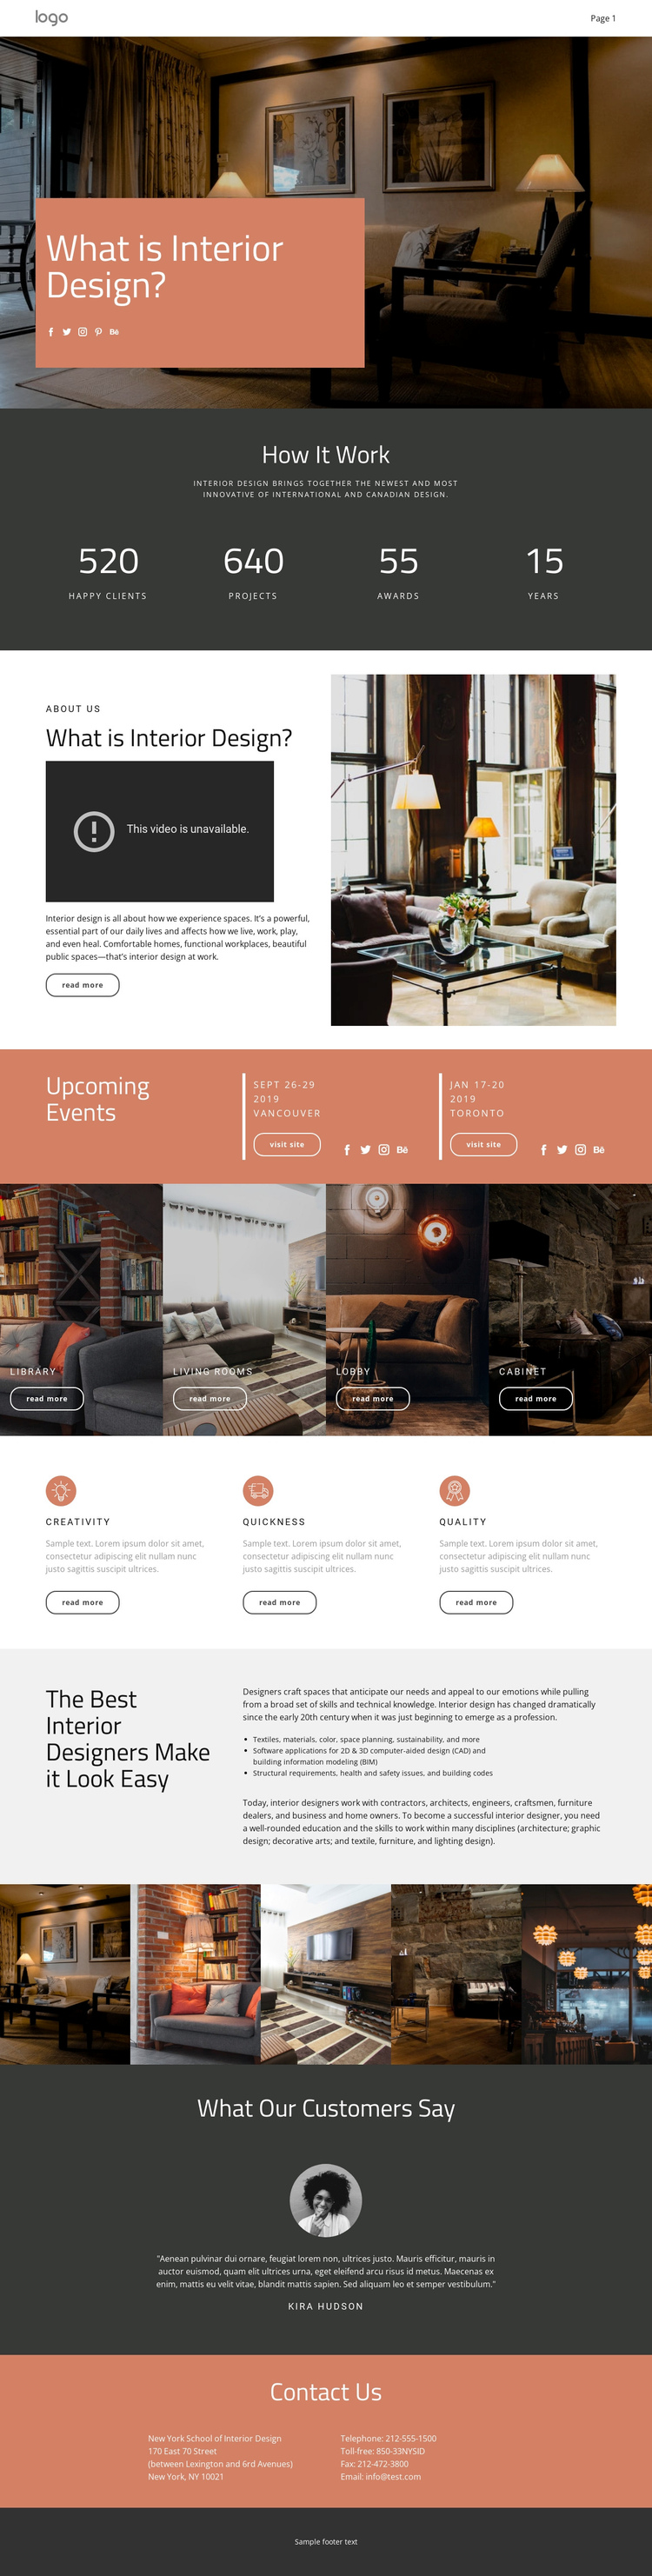 Design of houses and apartments Website Builder Software